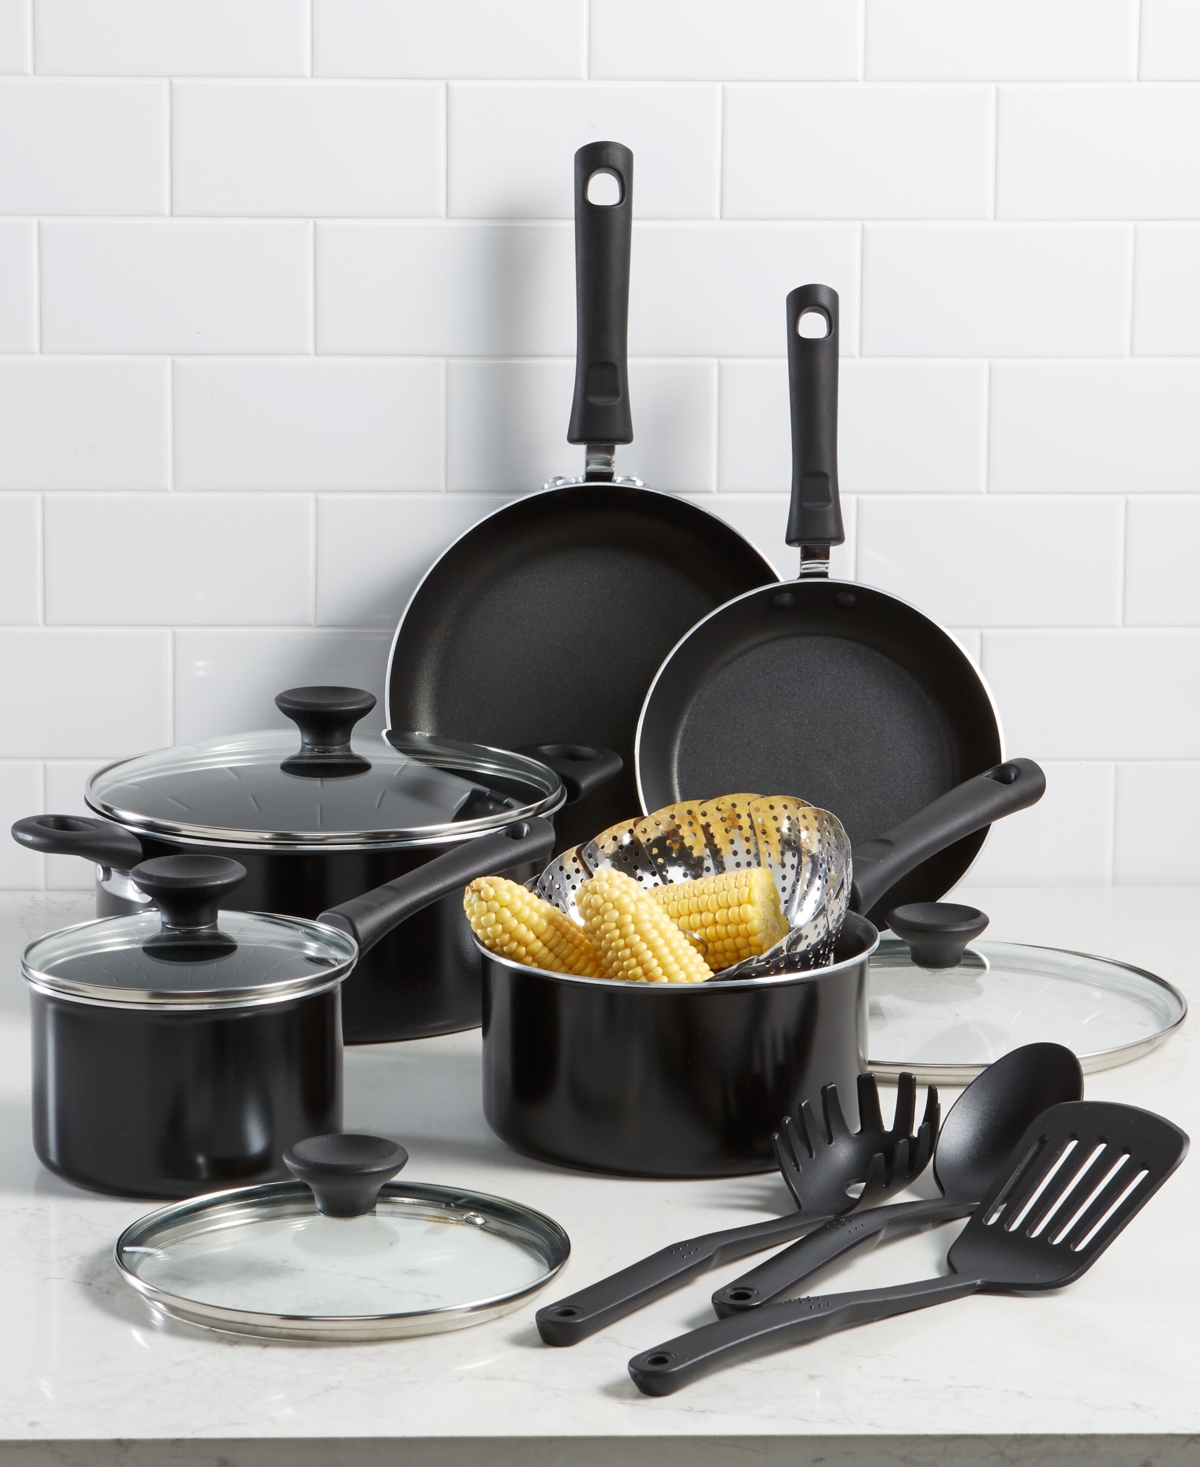 Tools of the Trade Nonstick 13-Pc. Cookware Set, Created for Macy's